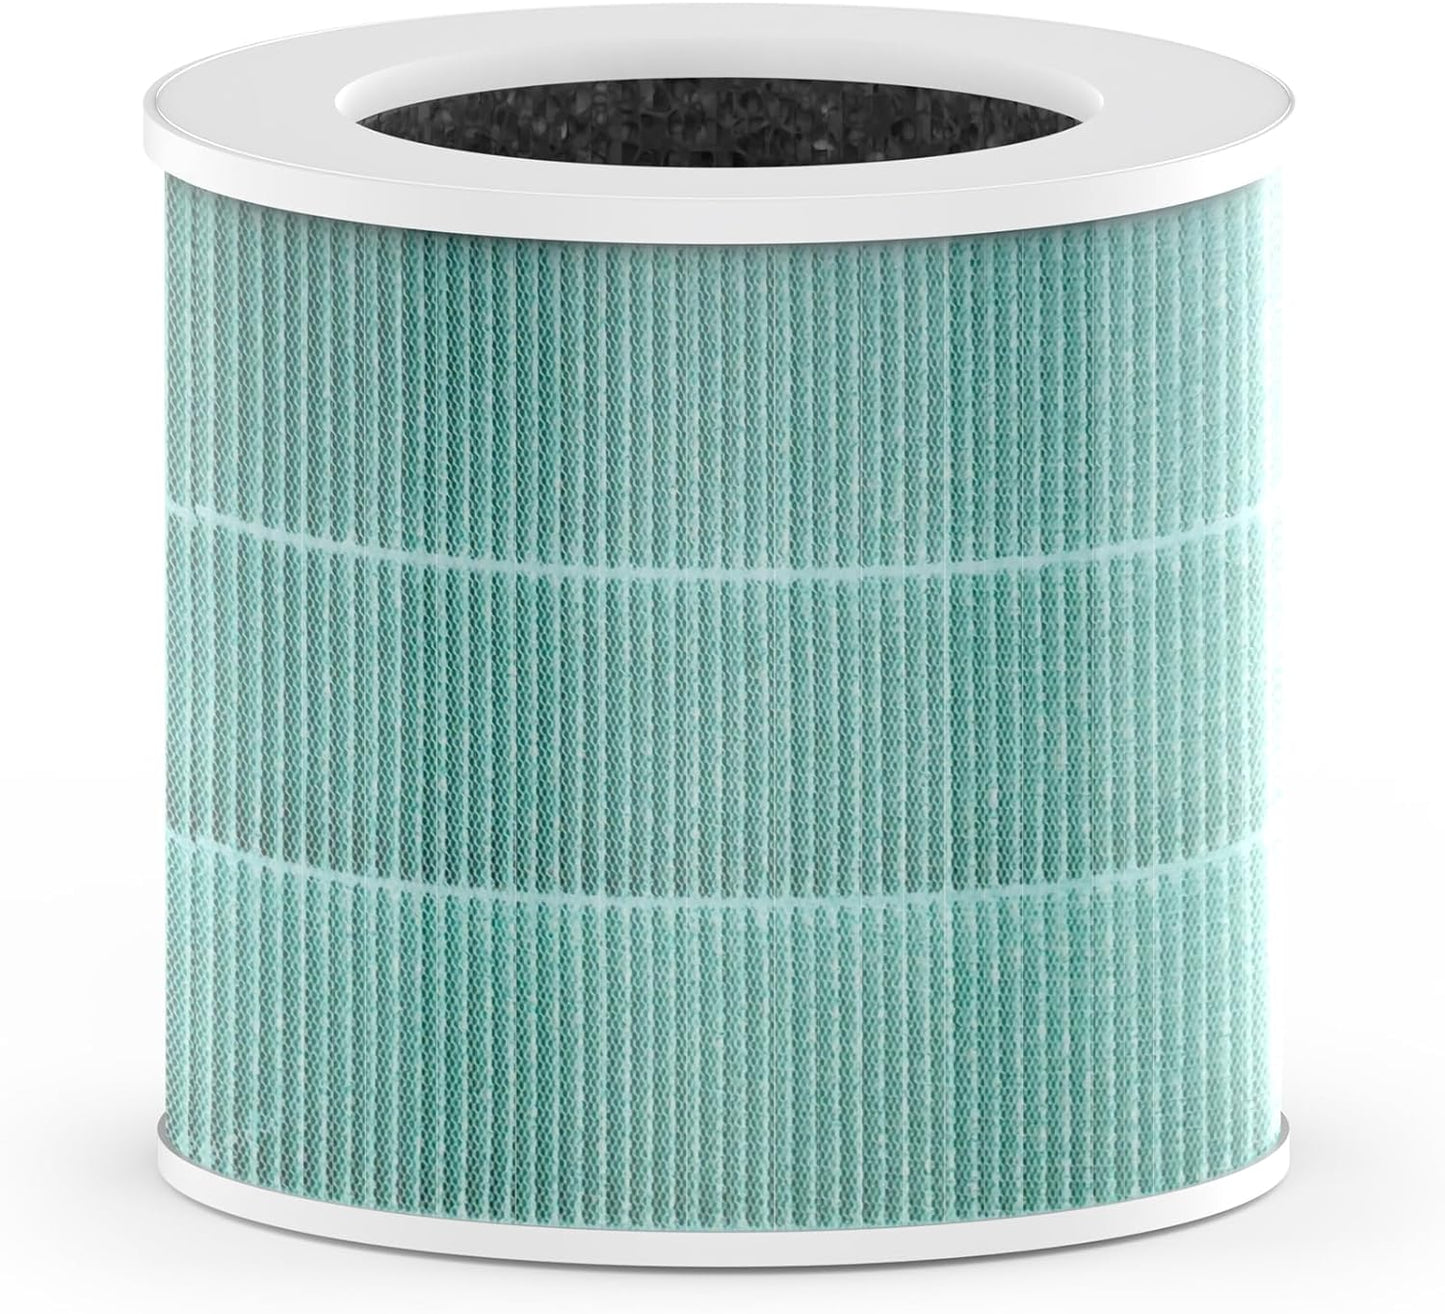 VEWIOR Official Replacement Filter H13 True HEPA Air Purifier Filter, Compatible with VEWIOR HQSC-50 HQKJ-80 A1 A1W Air Purifier, H13 True HEPA Air Cleaner Filter, VOCS Harmful Gas Filter